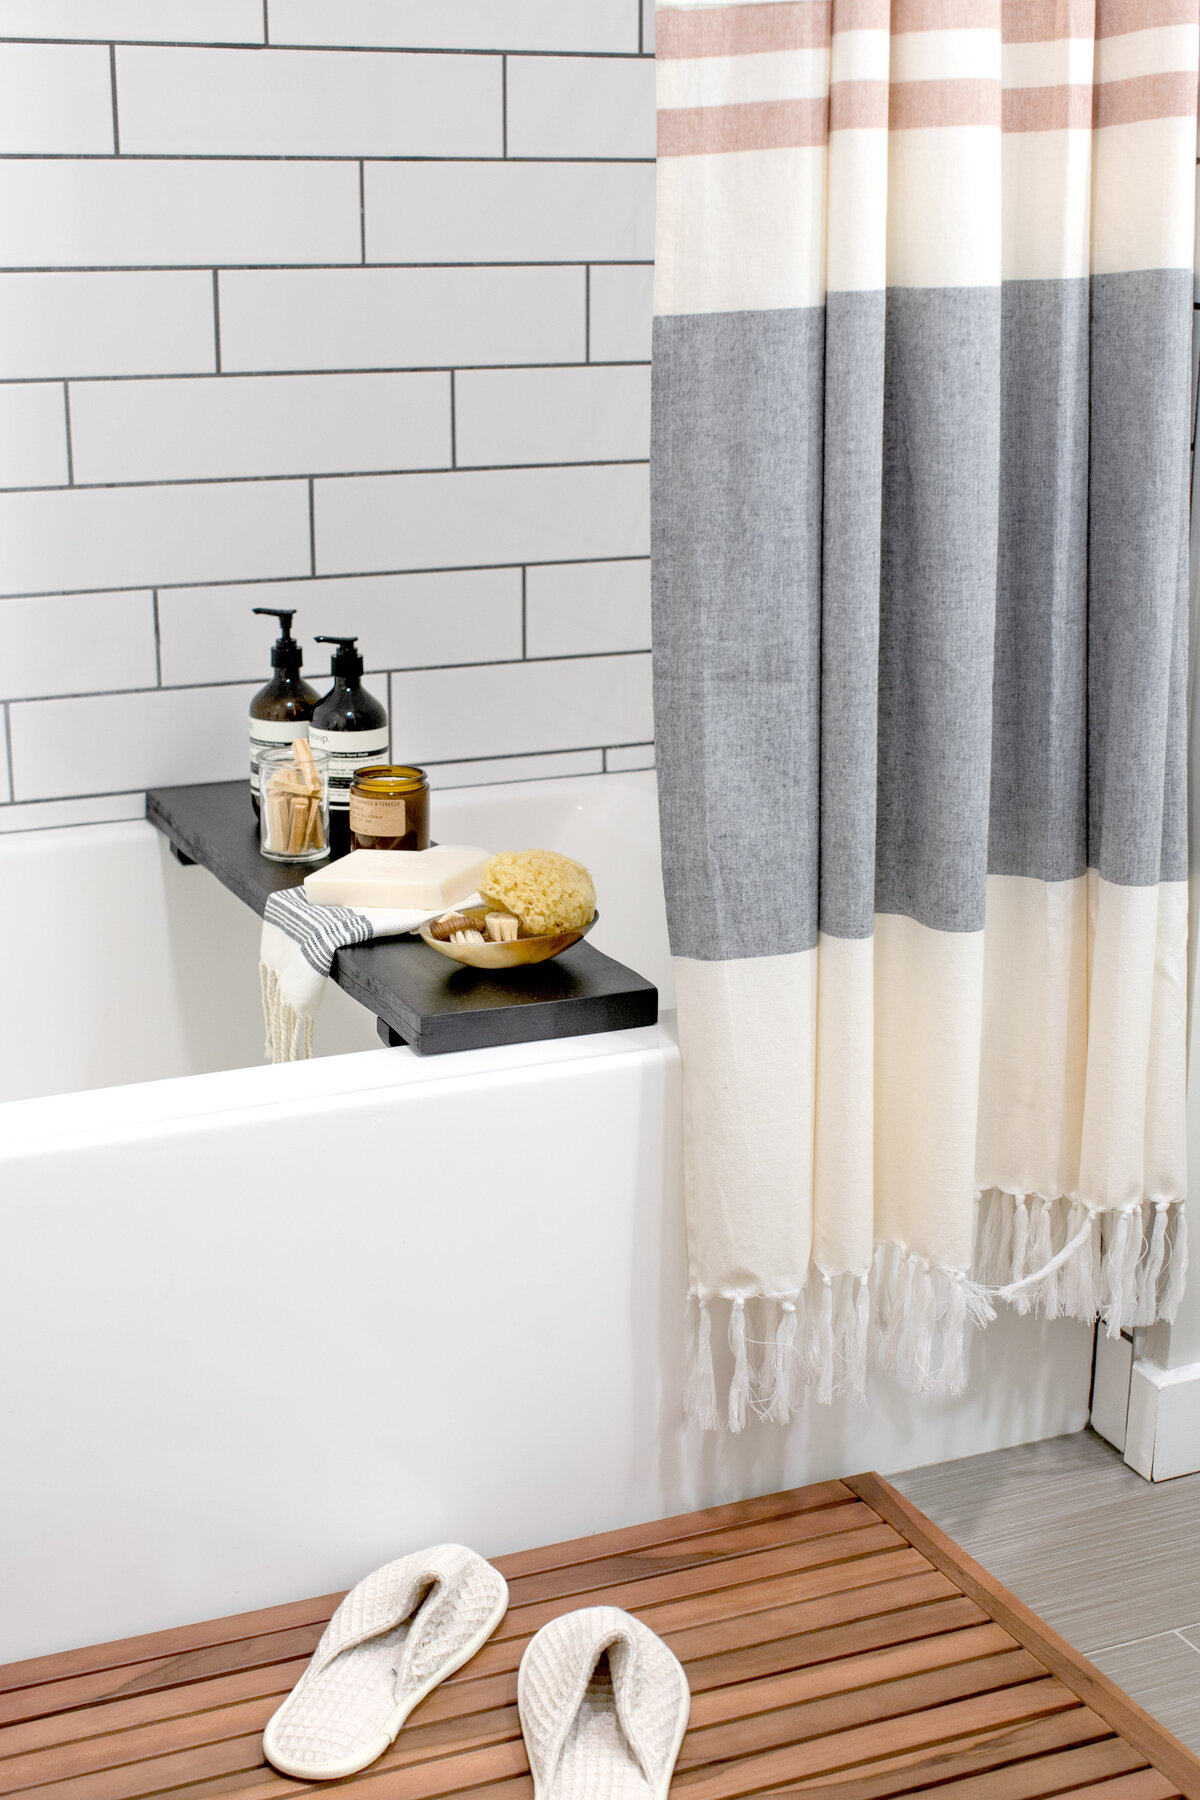 Bathroom with white bathtub, wooden bathmat with cotton slippers on top. Turkish style striped shower curtain covering white subway tiled wall. Black wooden tray with soaps and objects on top of tub